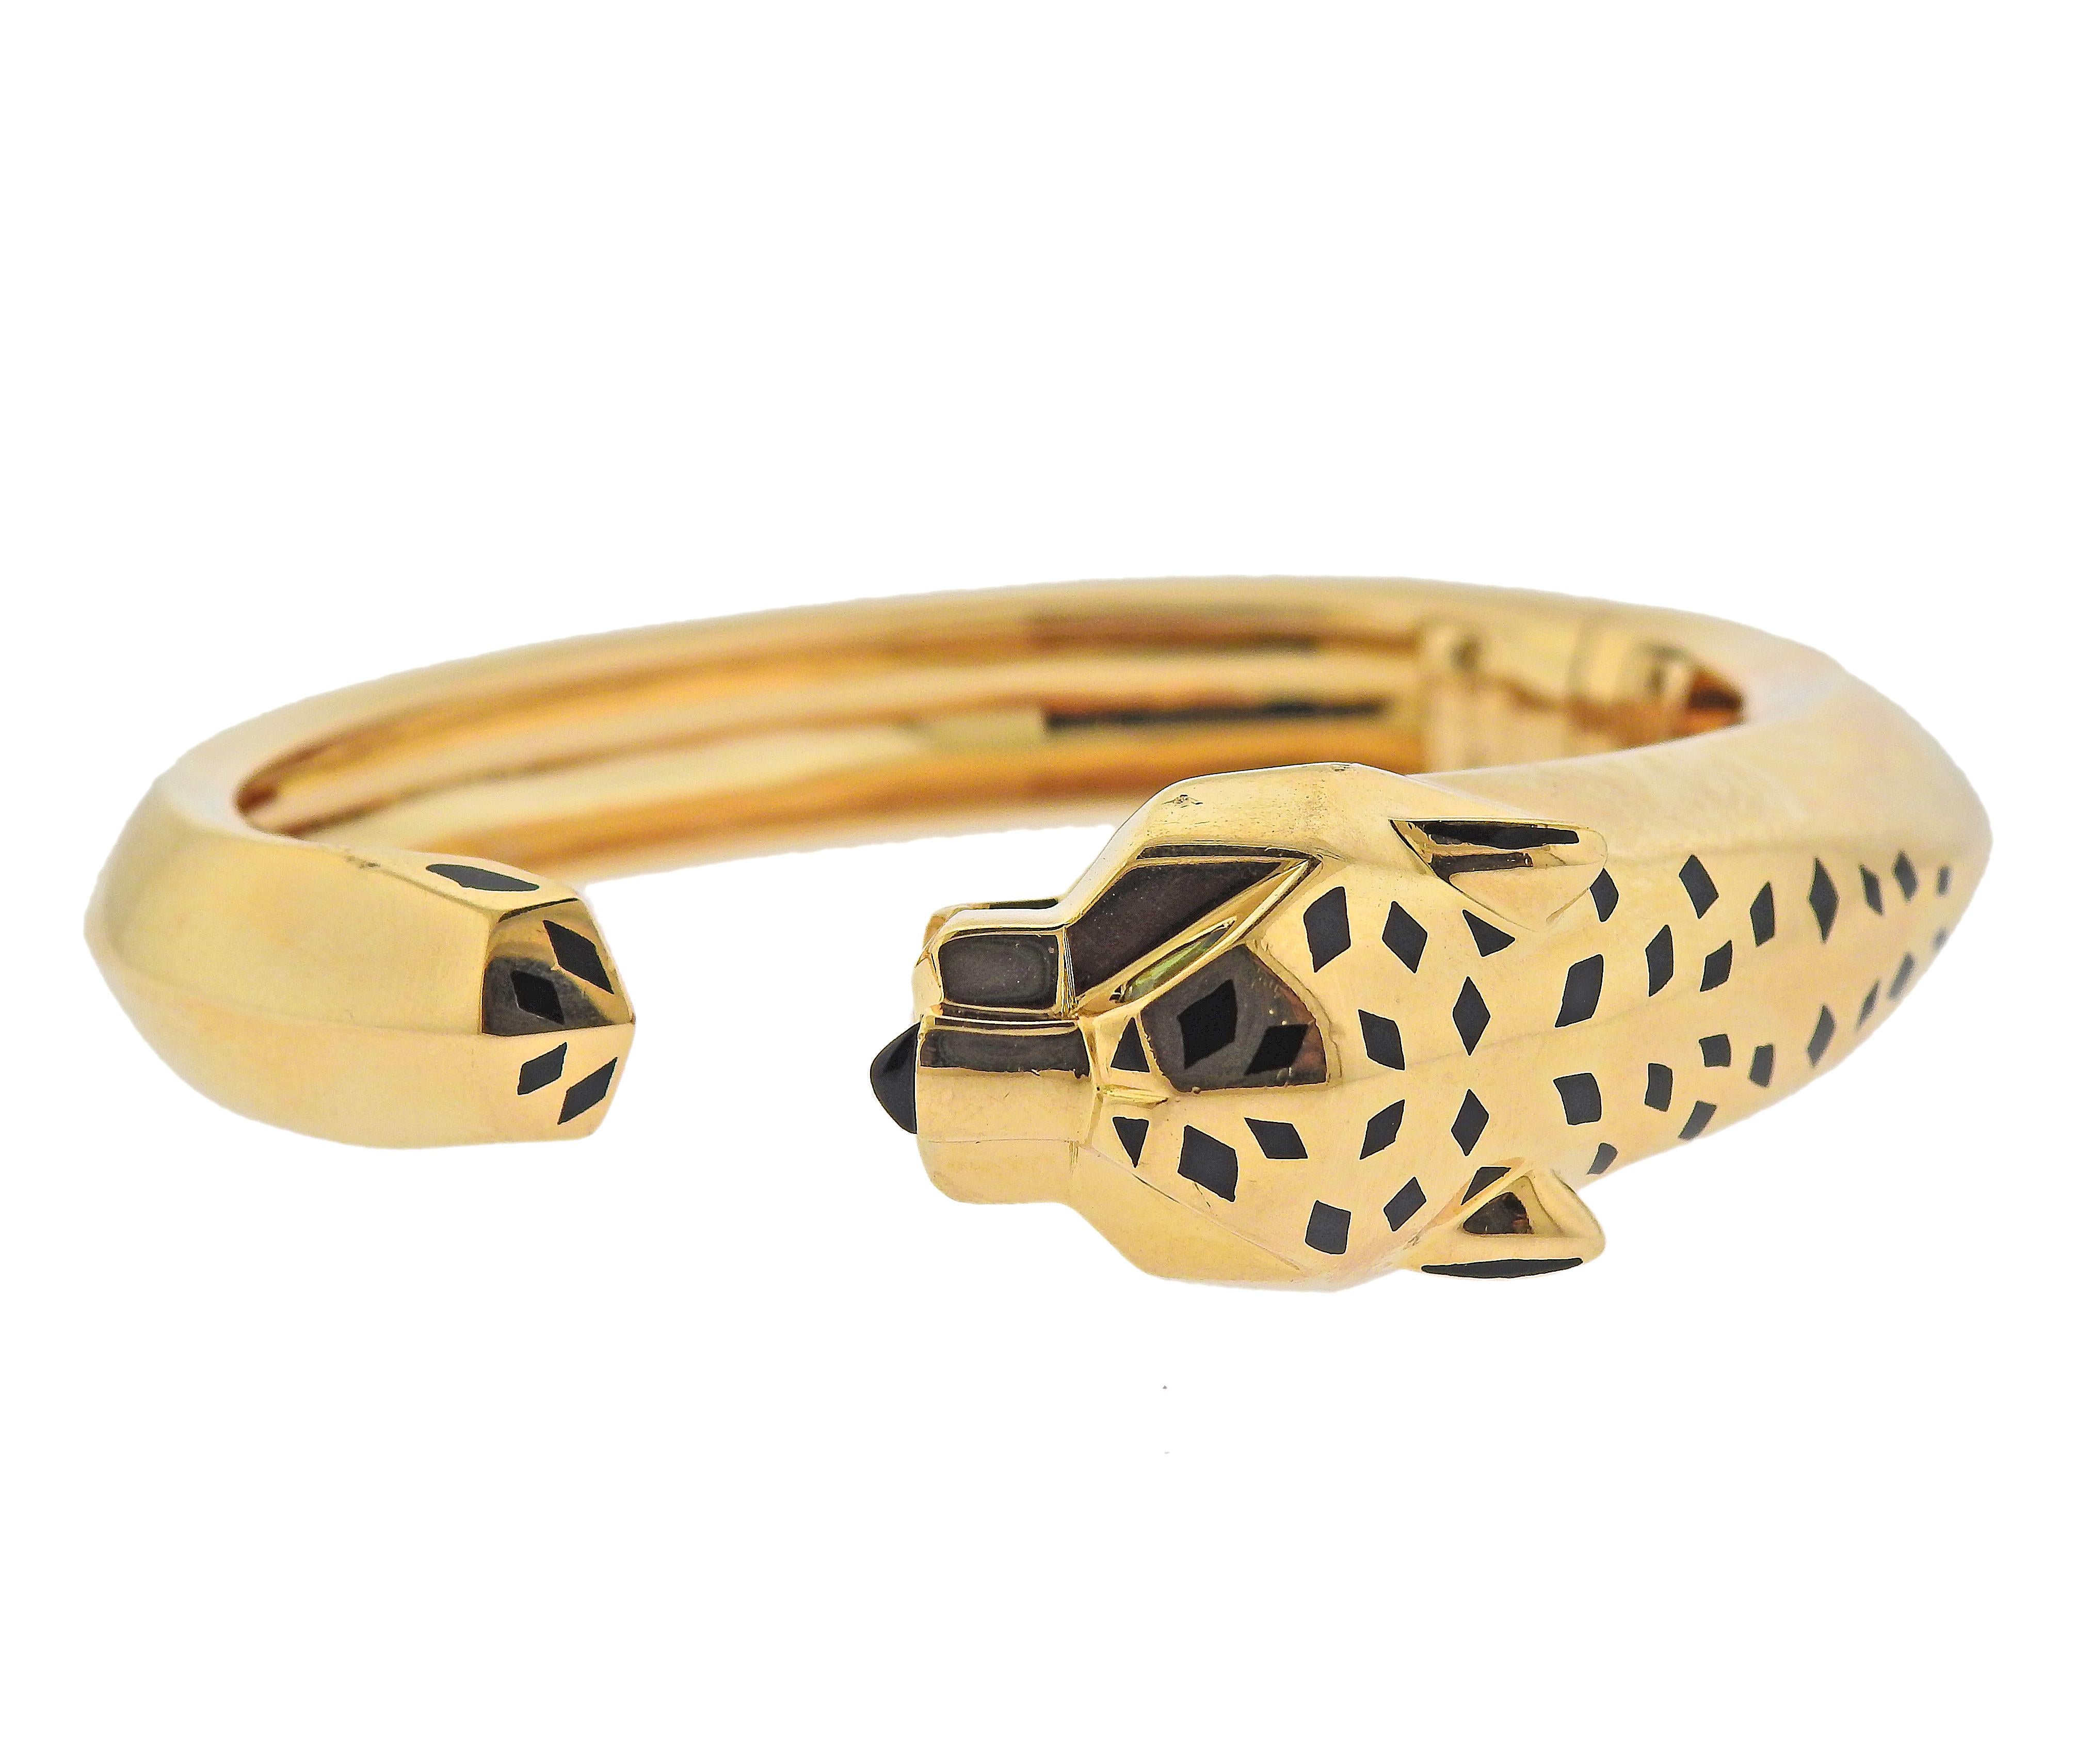 Cartier 18k rose gold iconic Panthere cuff bracelet, decorated with peridot eyes, onyx nose and enamel top. Bracelet will it an average size wrist, approx. up to 7.5